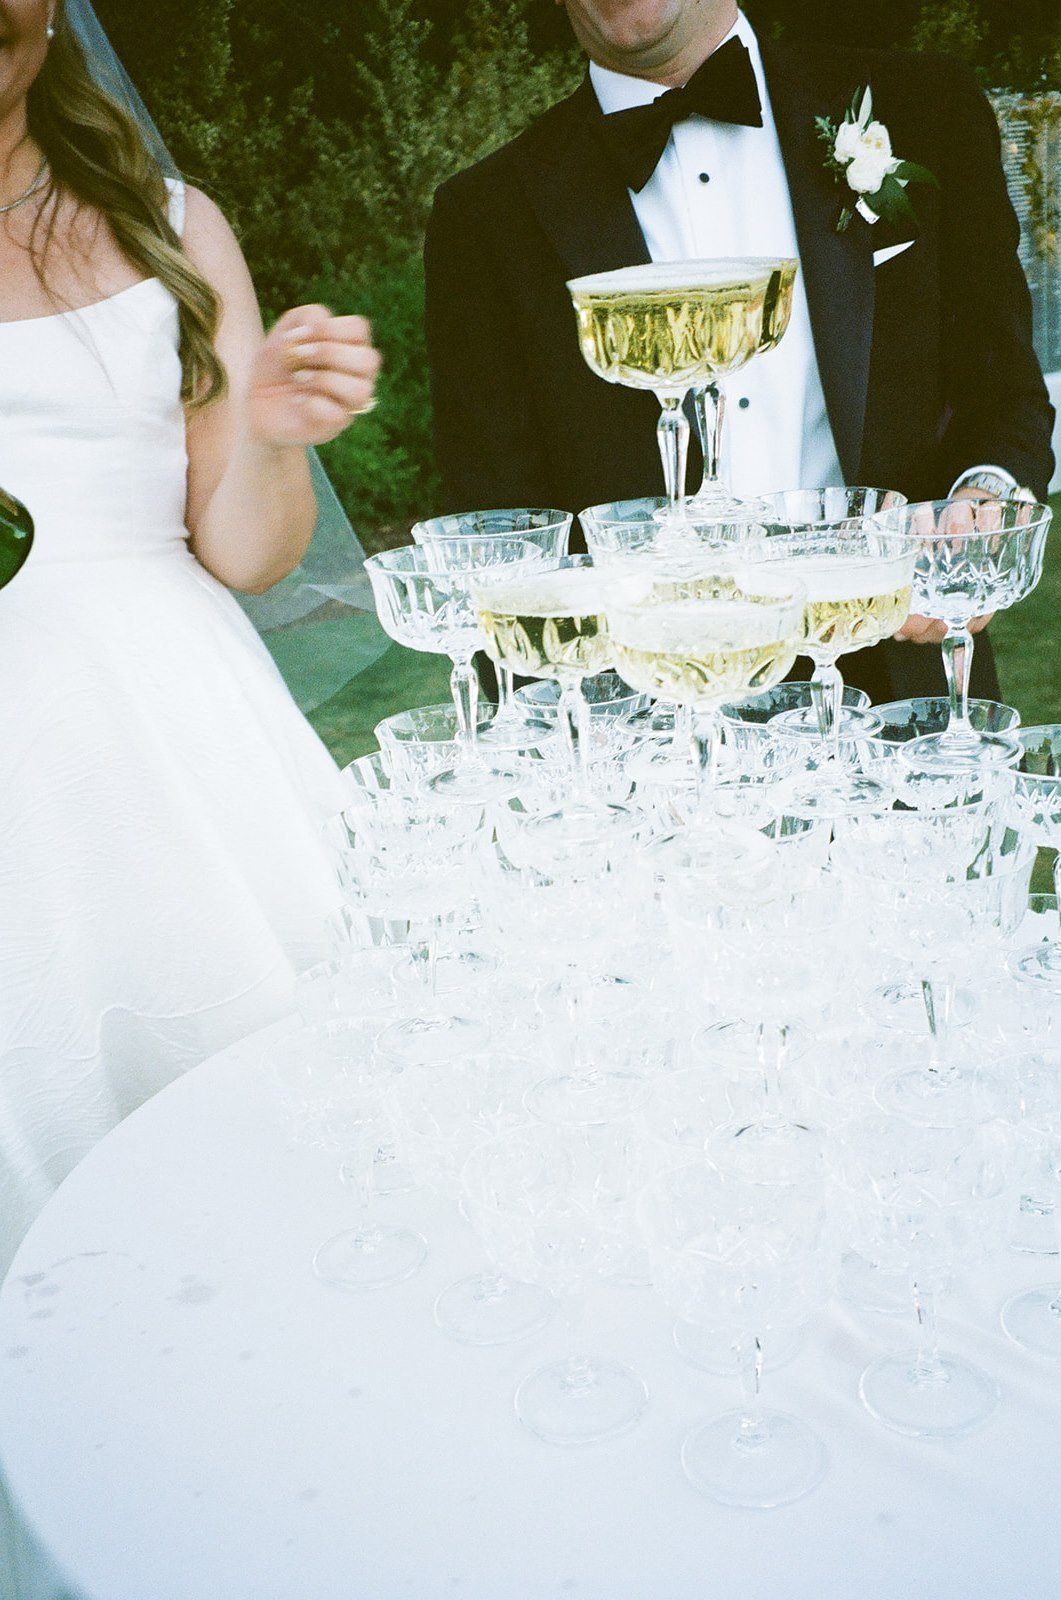 Film photos of bride and groom pouring champagne on champagne tower